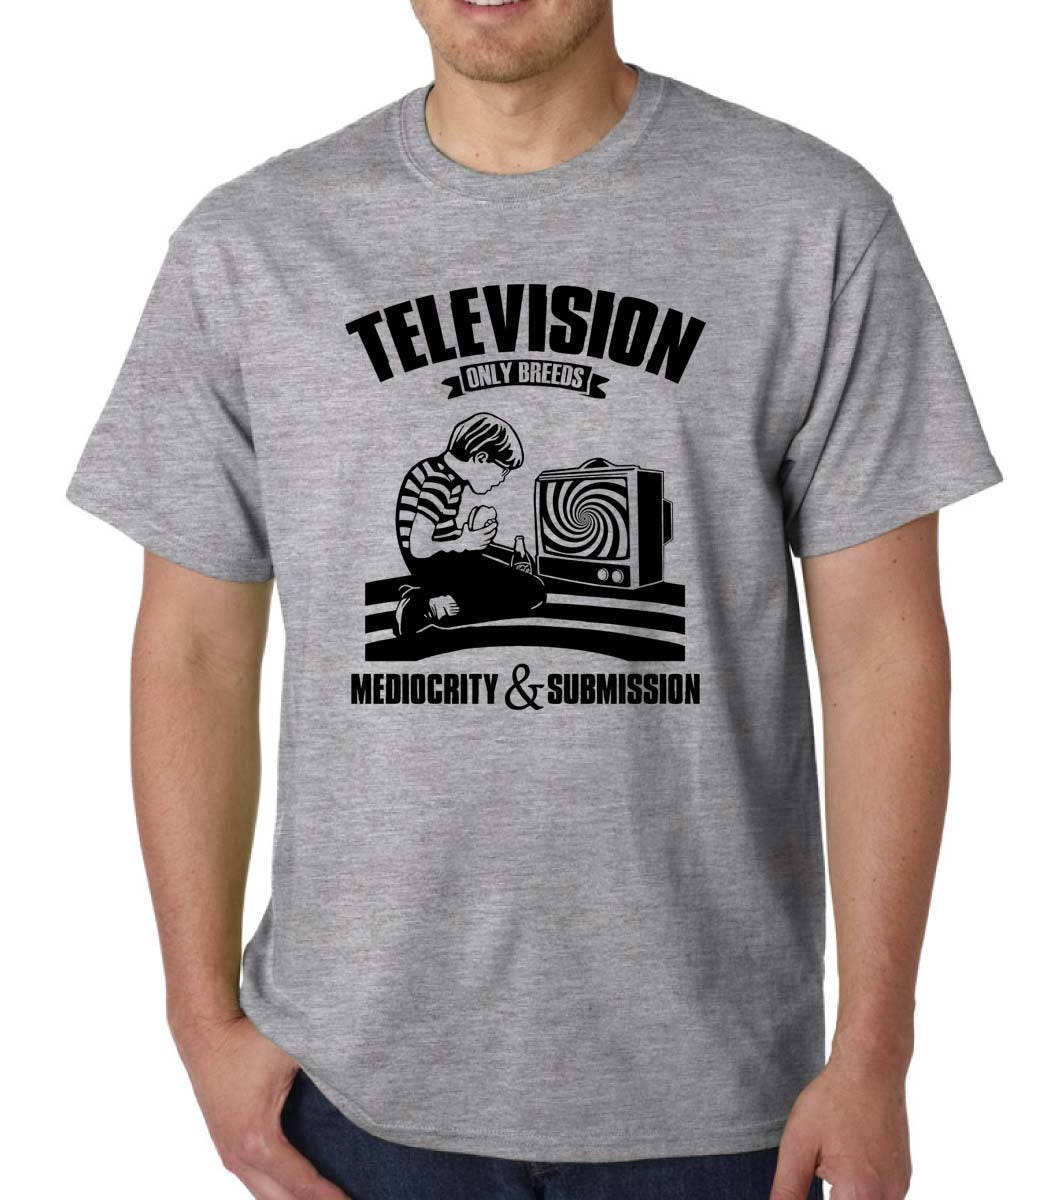 Television Only Breeds Mediocrity & Submission t-shirt